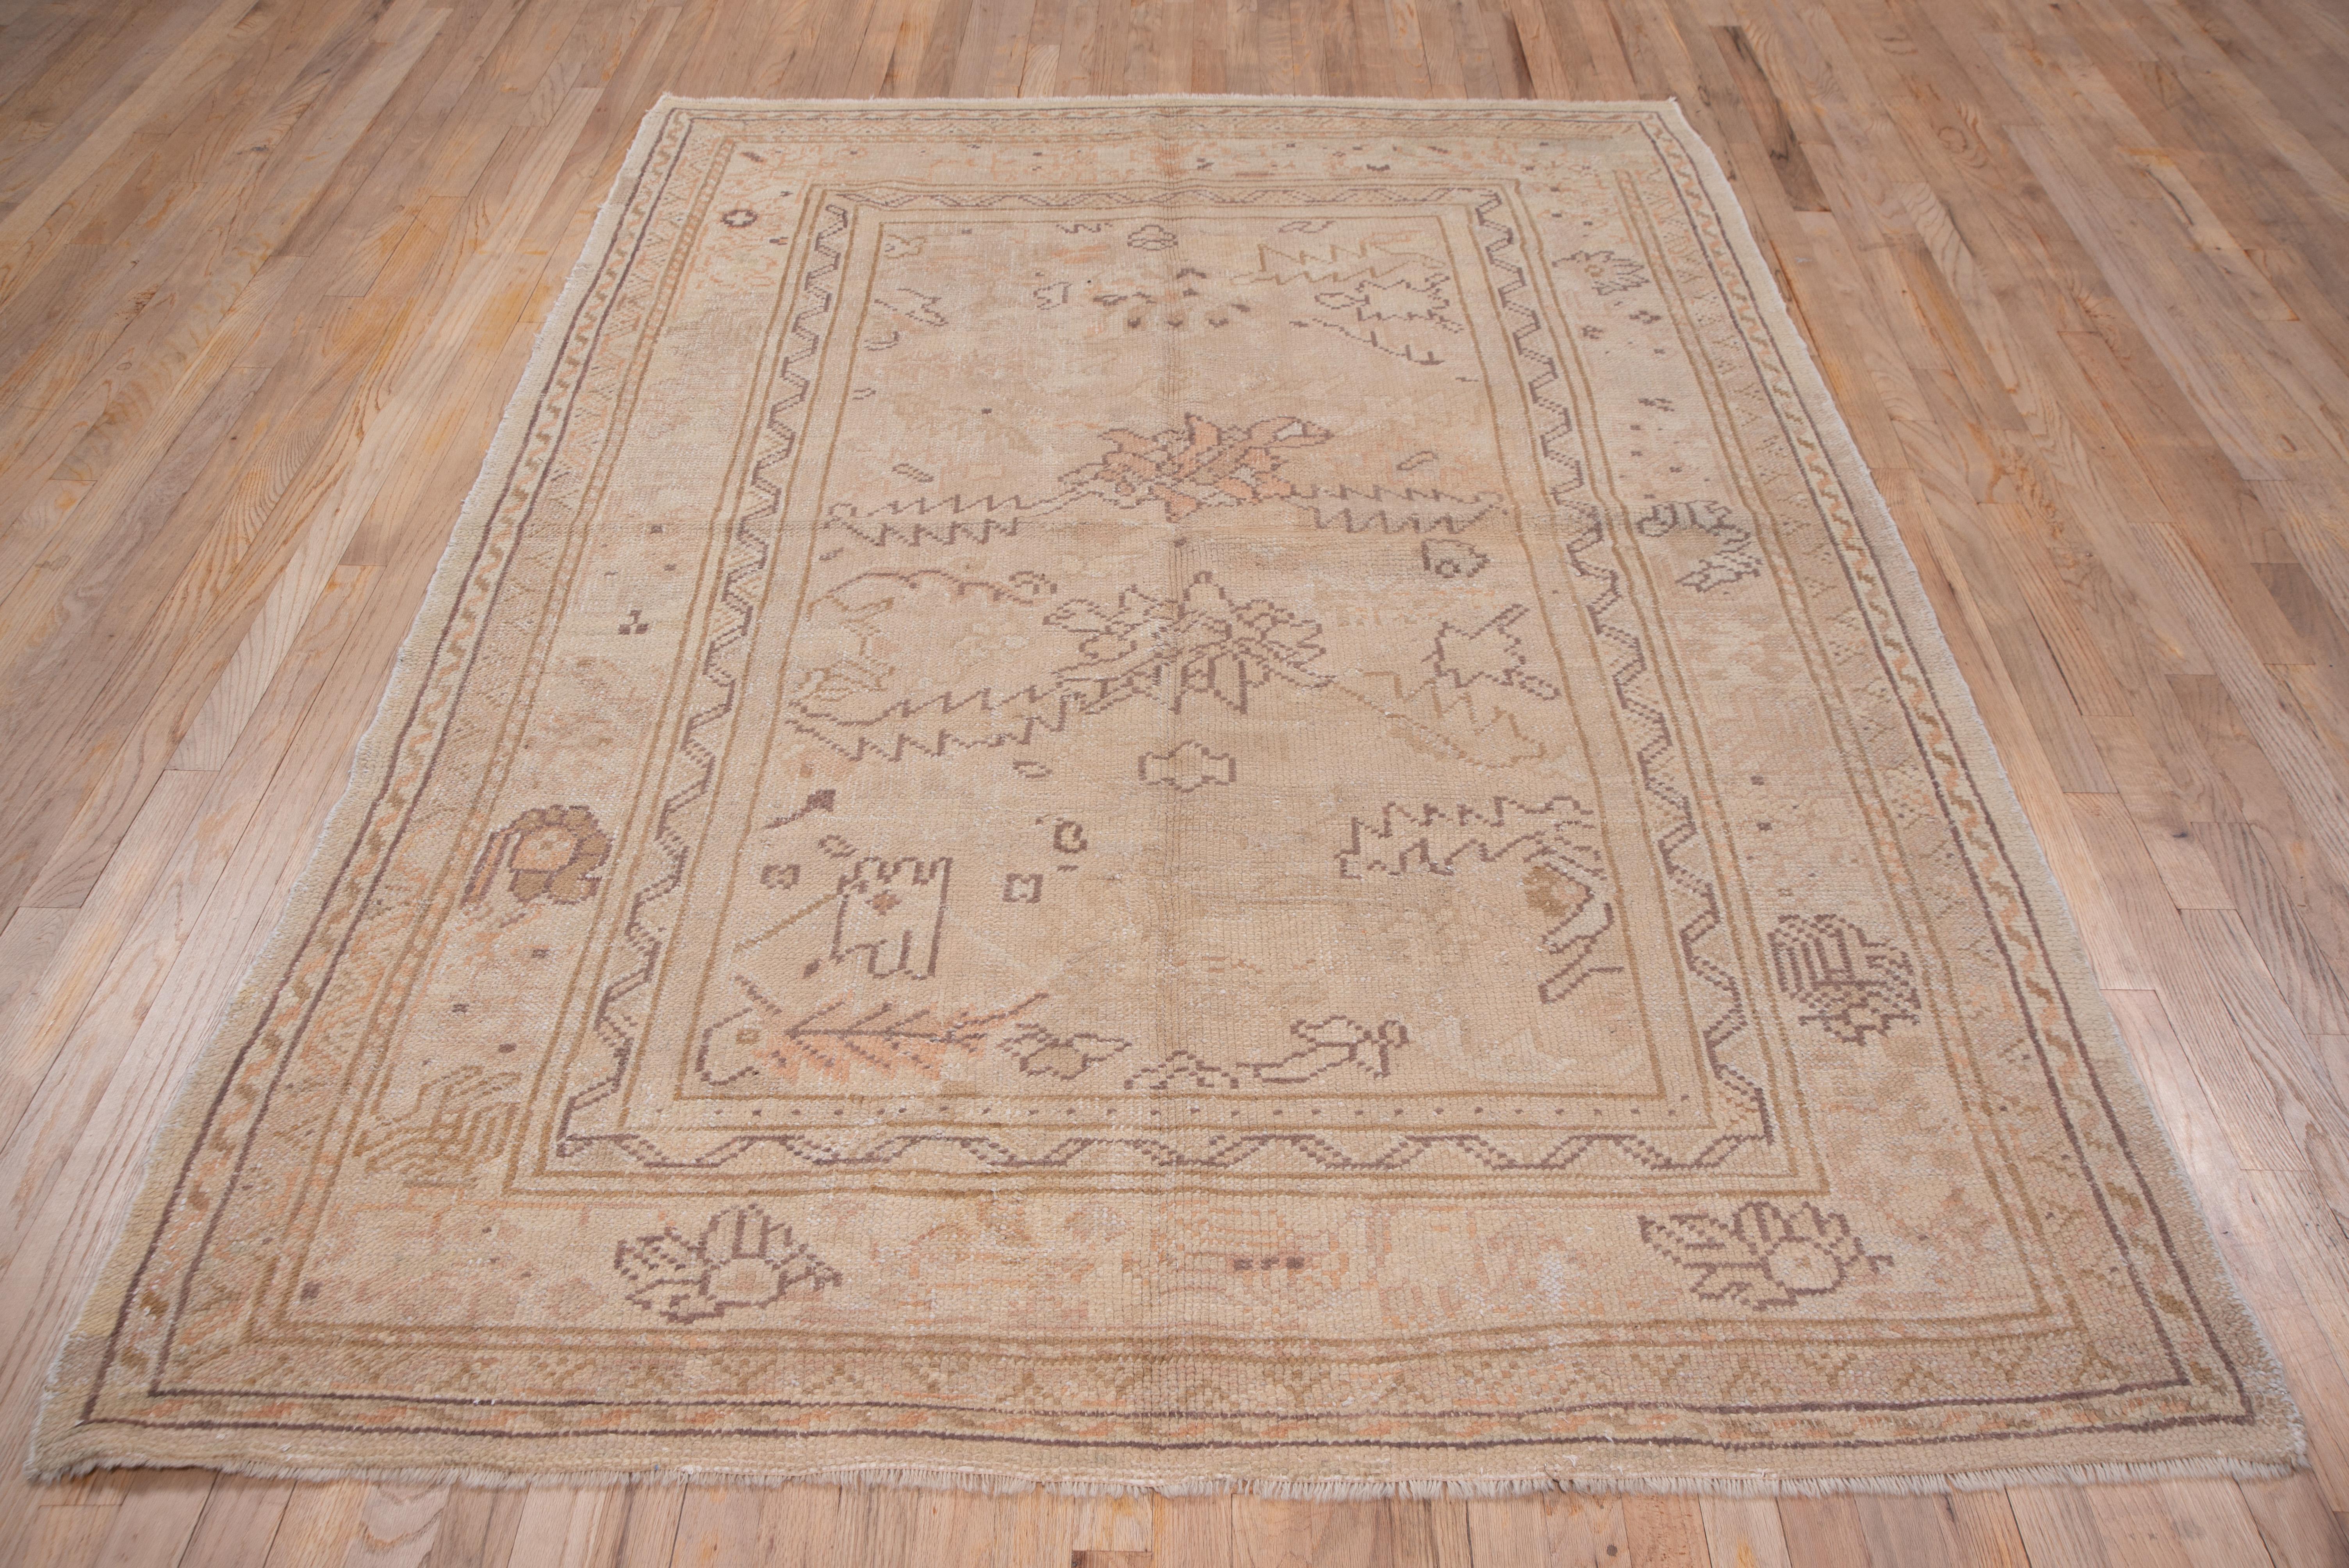 Hand-Knotted Rare Antique Tone on Tone Turkish Oushak Rug, Coral Accents, circa 1920s For Sale